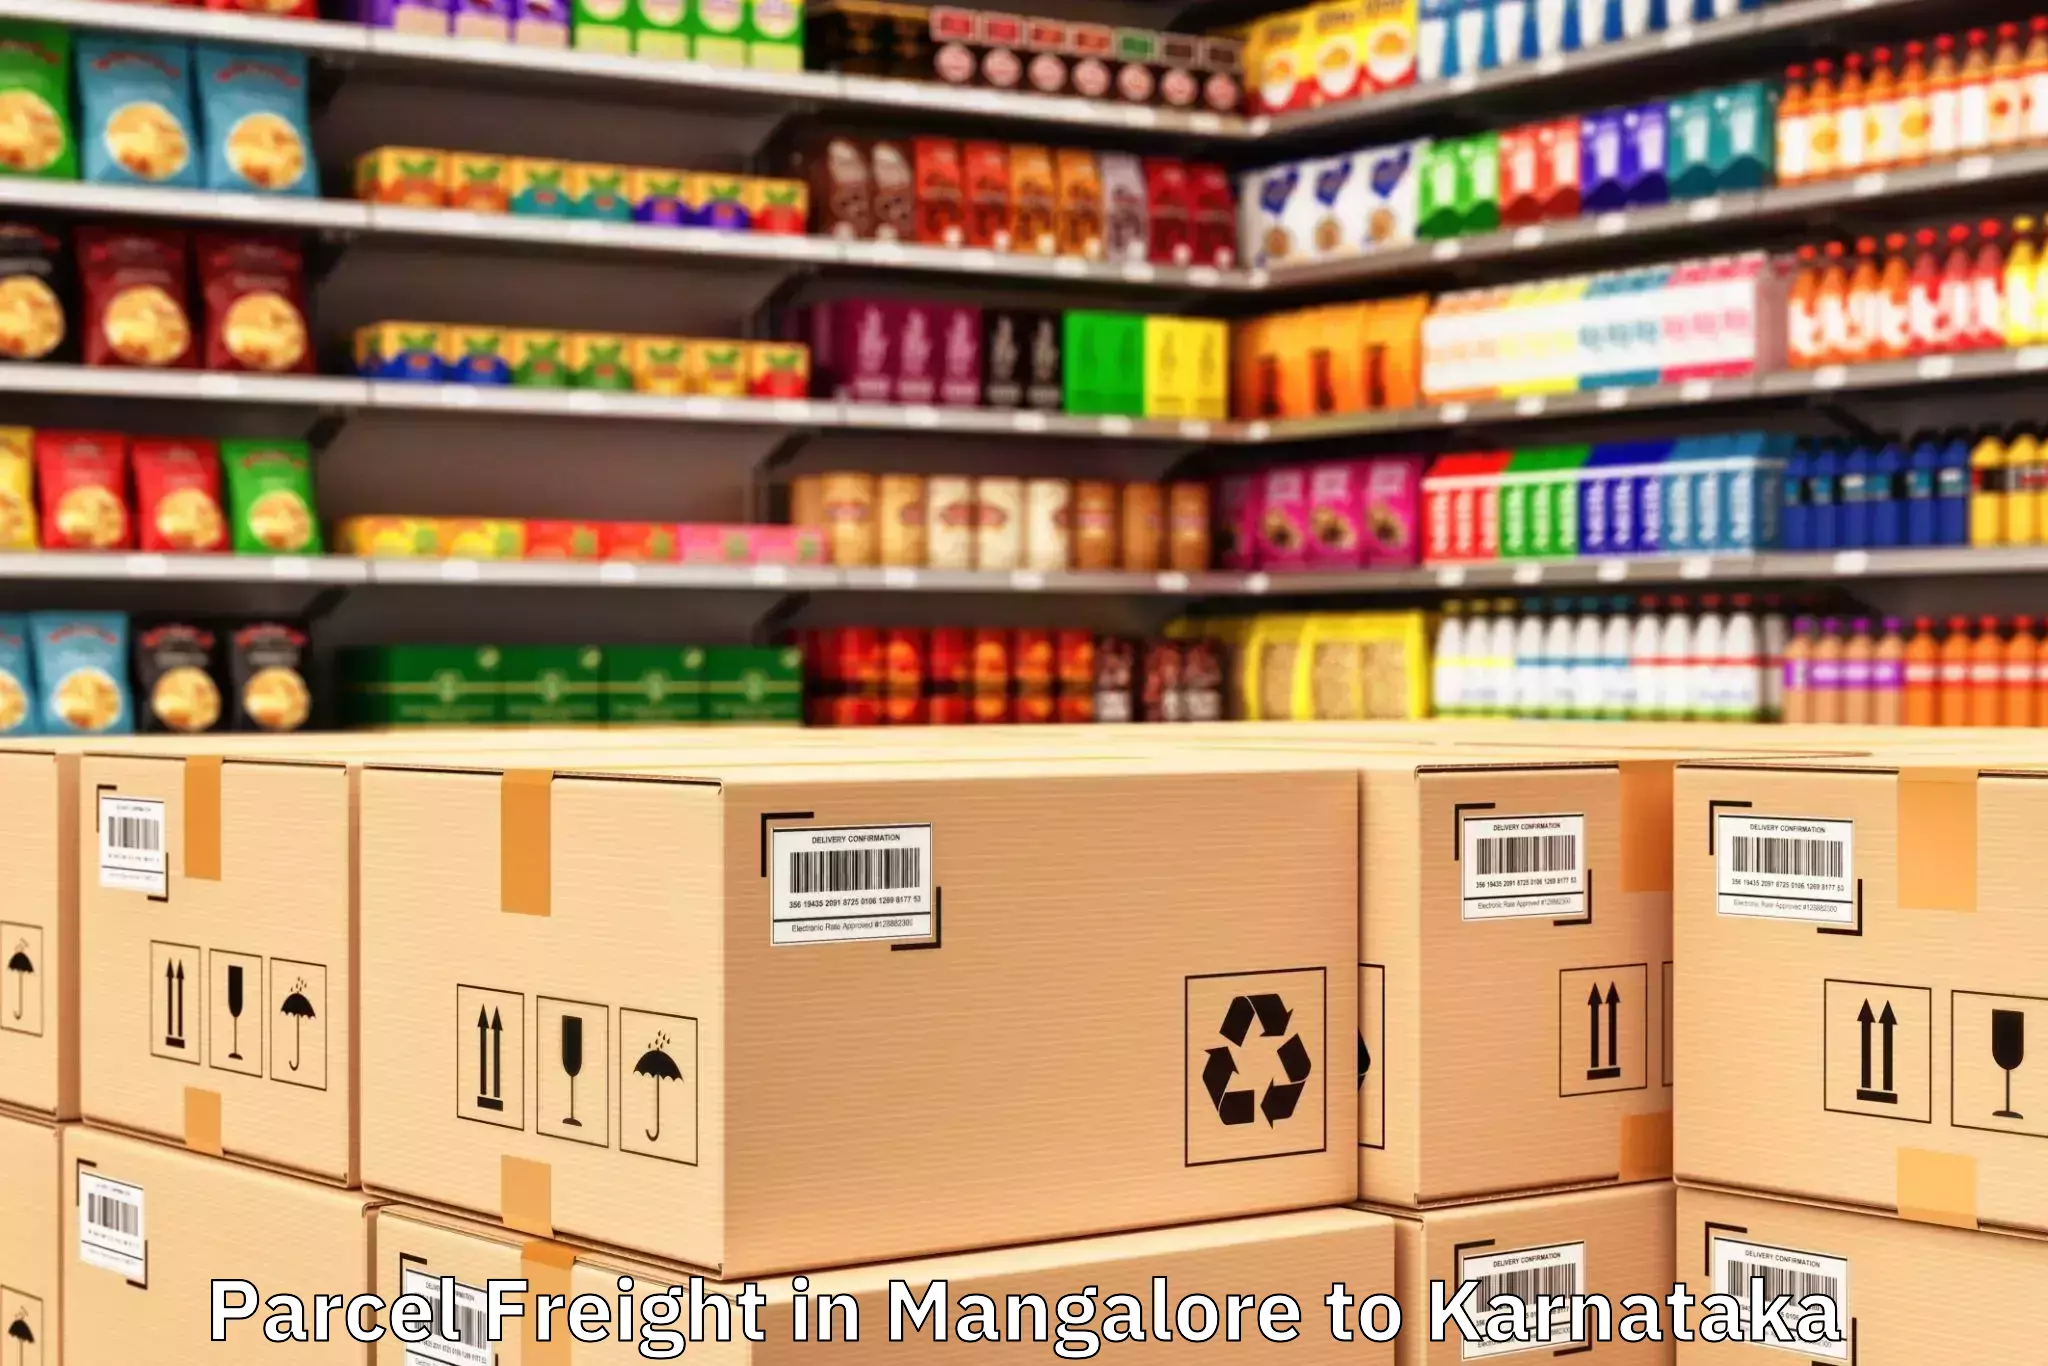 Discover Mangalore to Munirabad Rural Parcel Freight